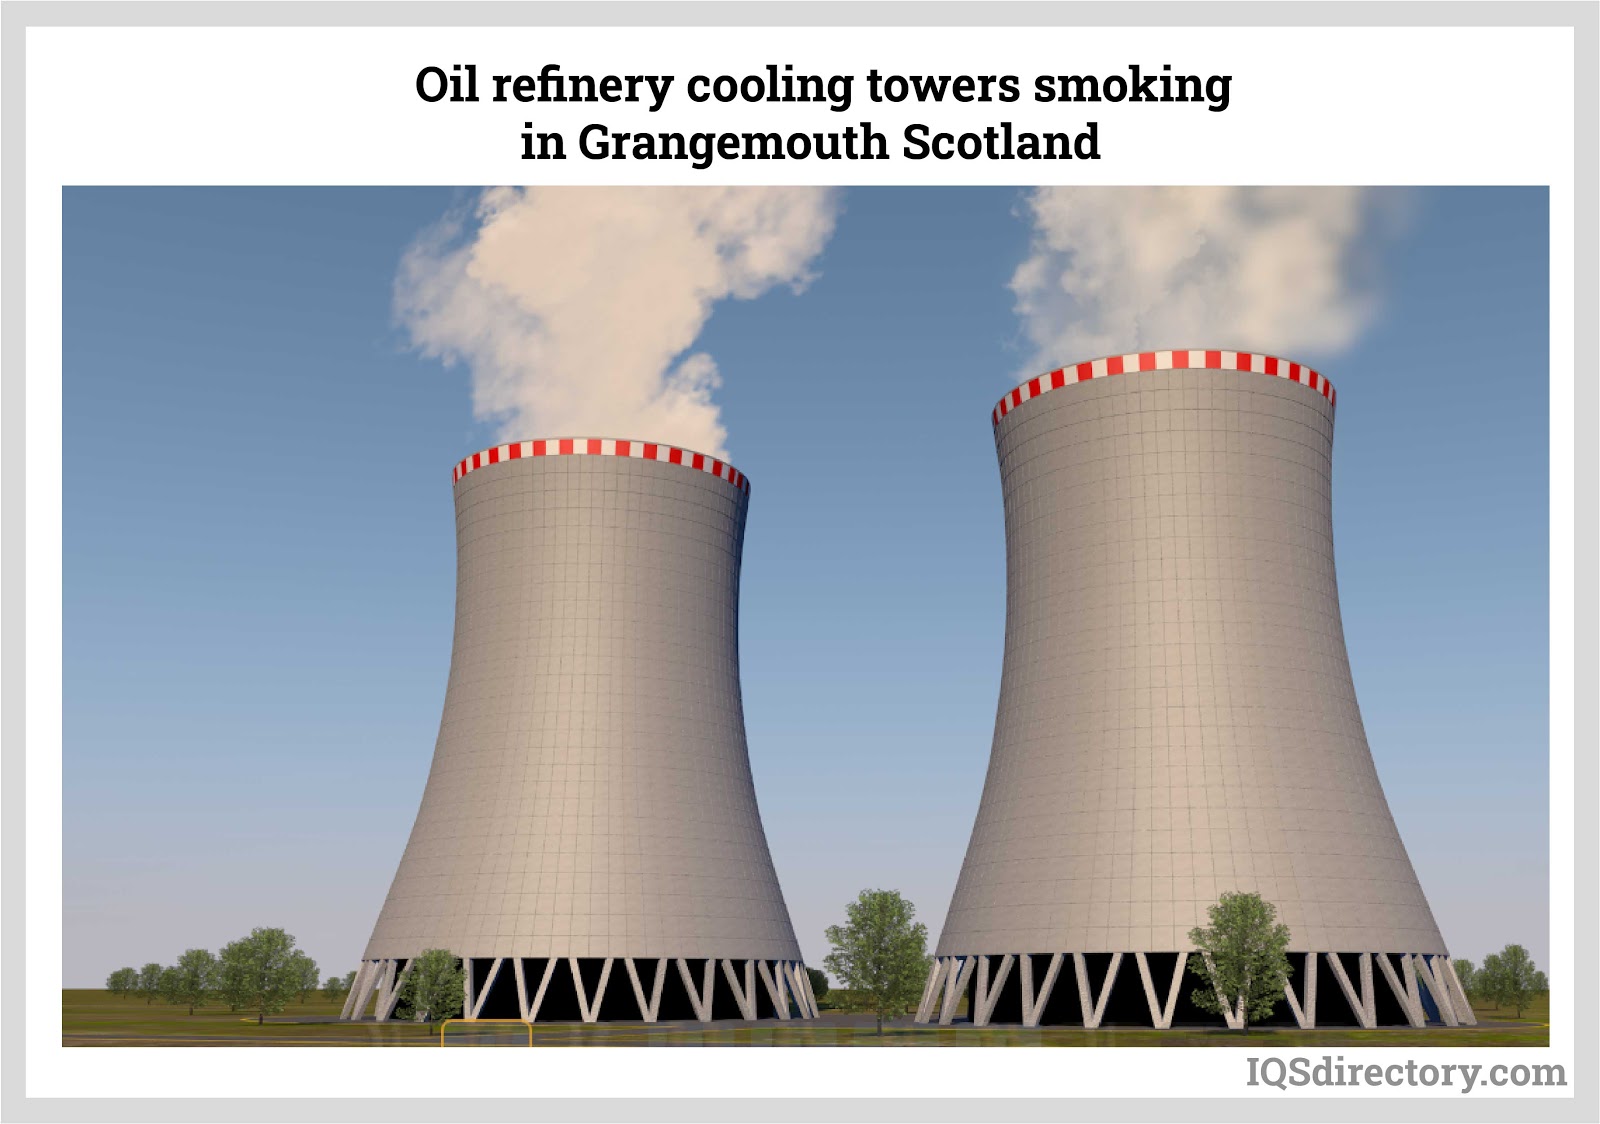 Oil refinery cooling towers smoking in Grangemouth Scotland